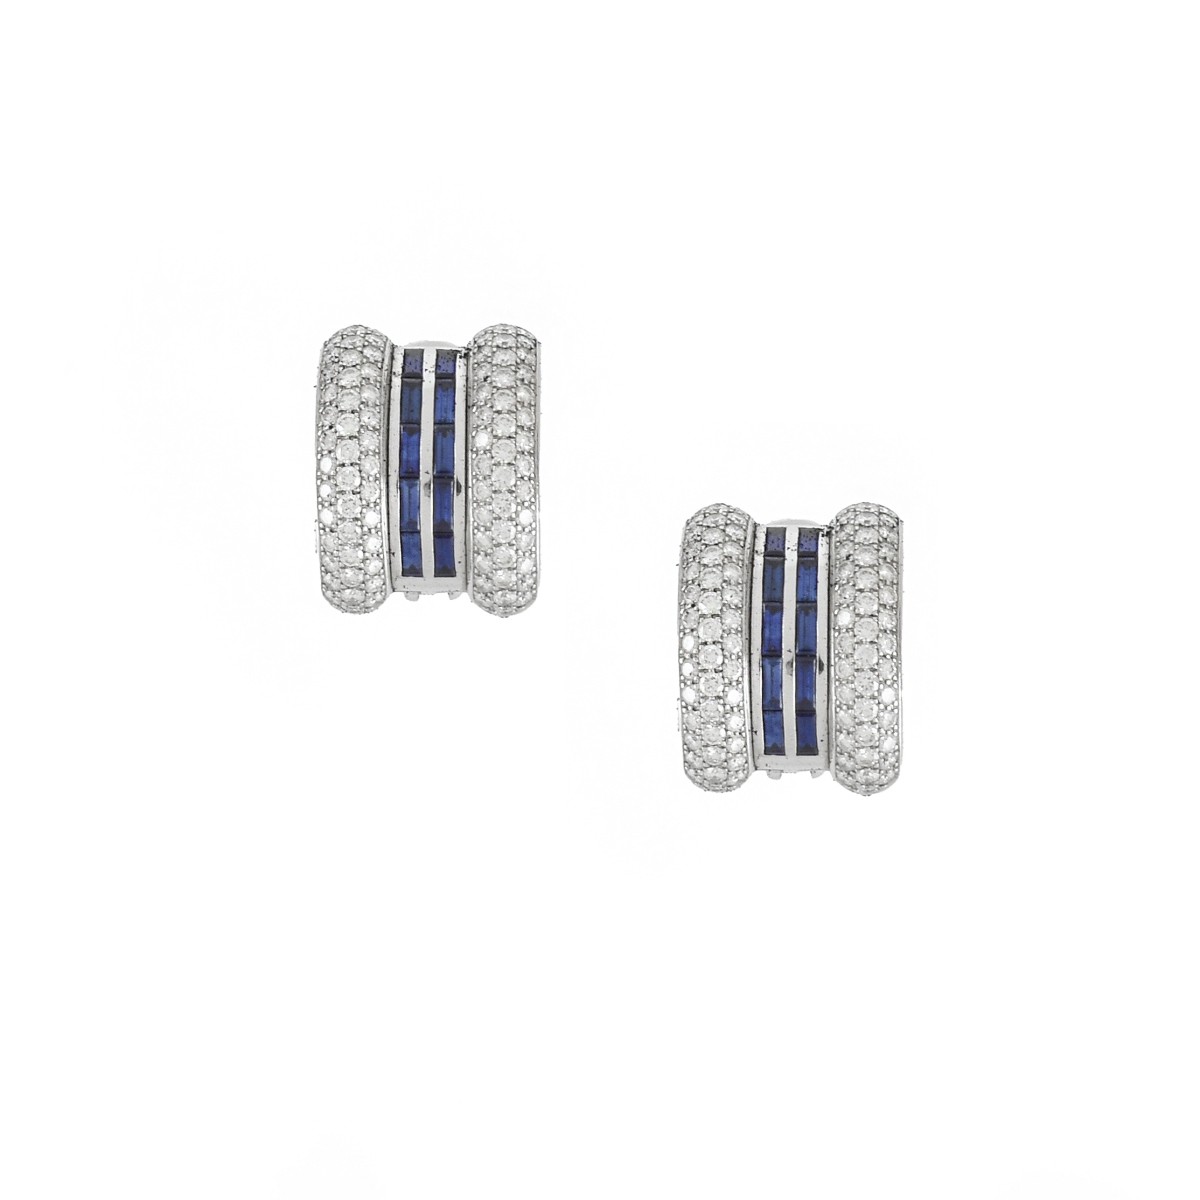 Chopard Diamond and Sapphire Ring and Earrings